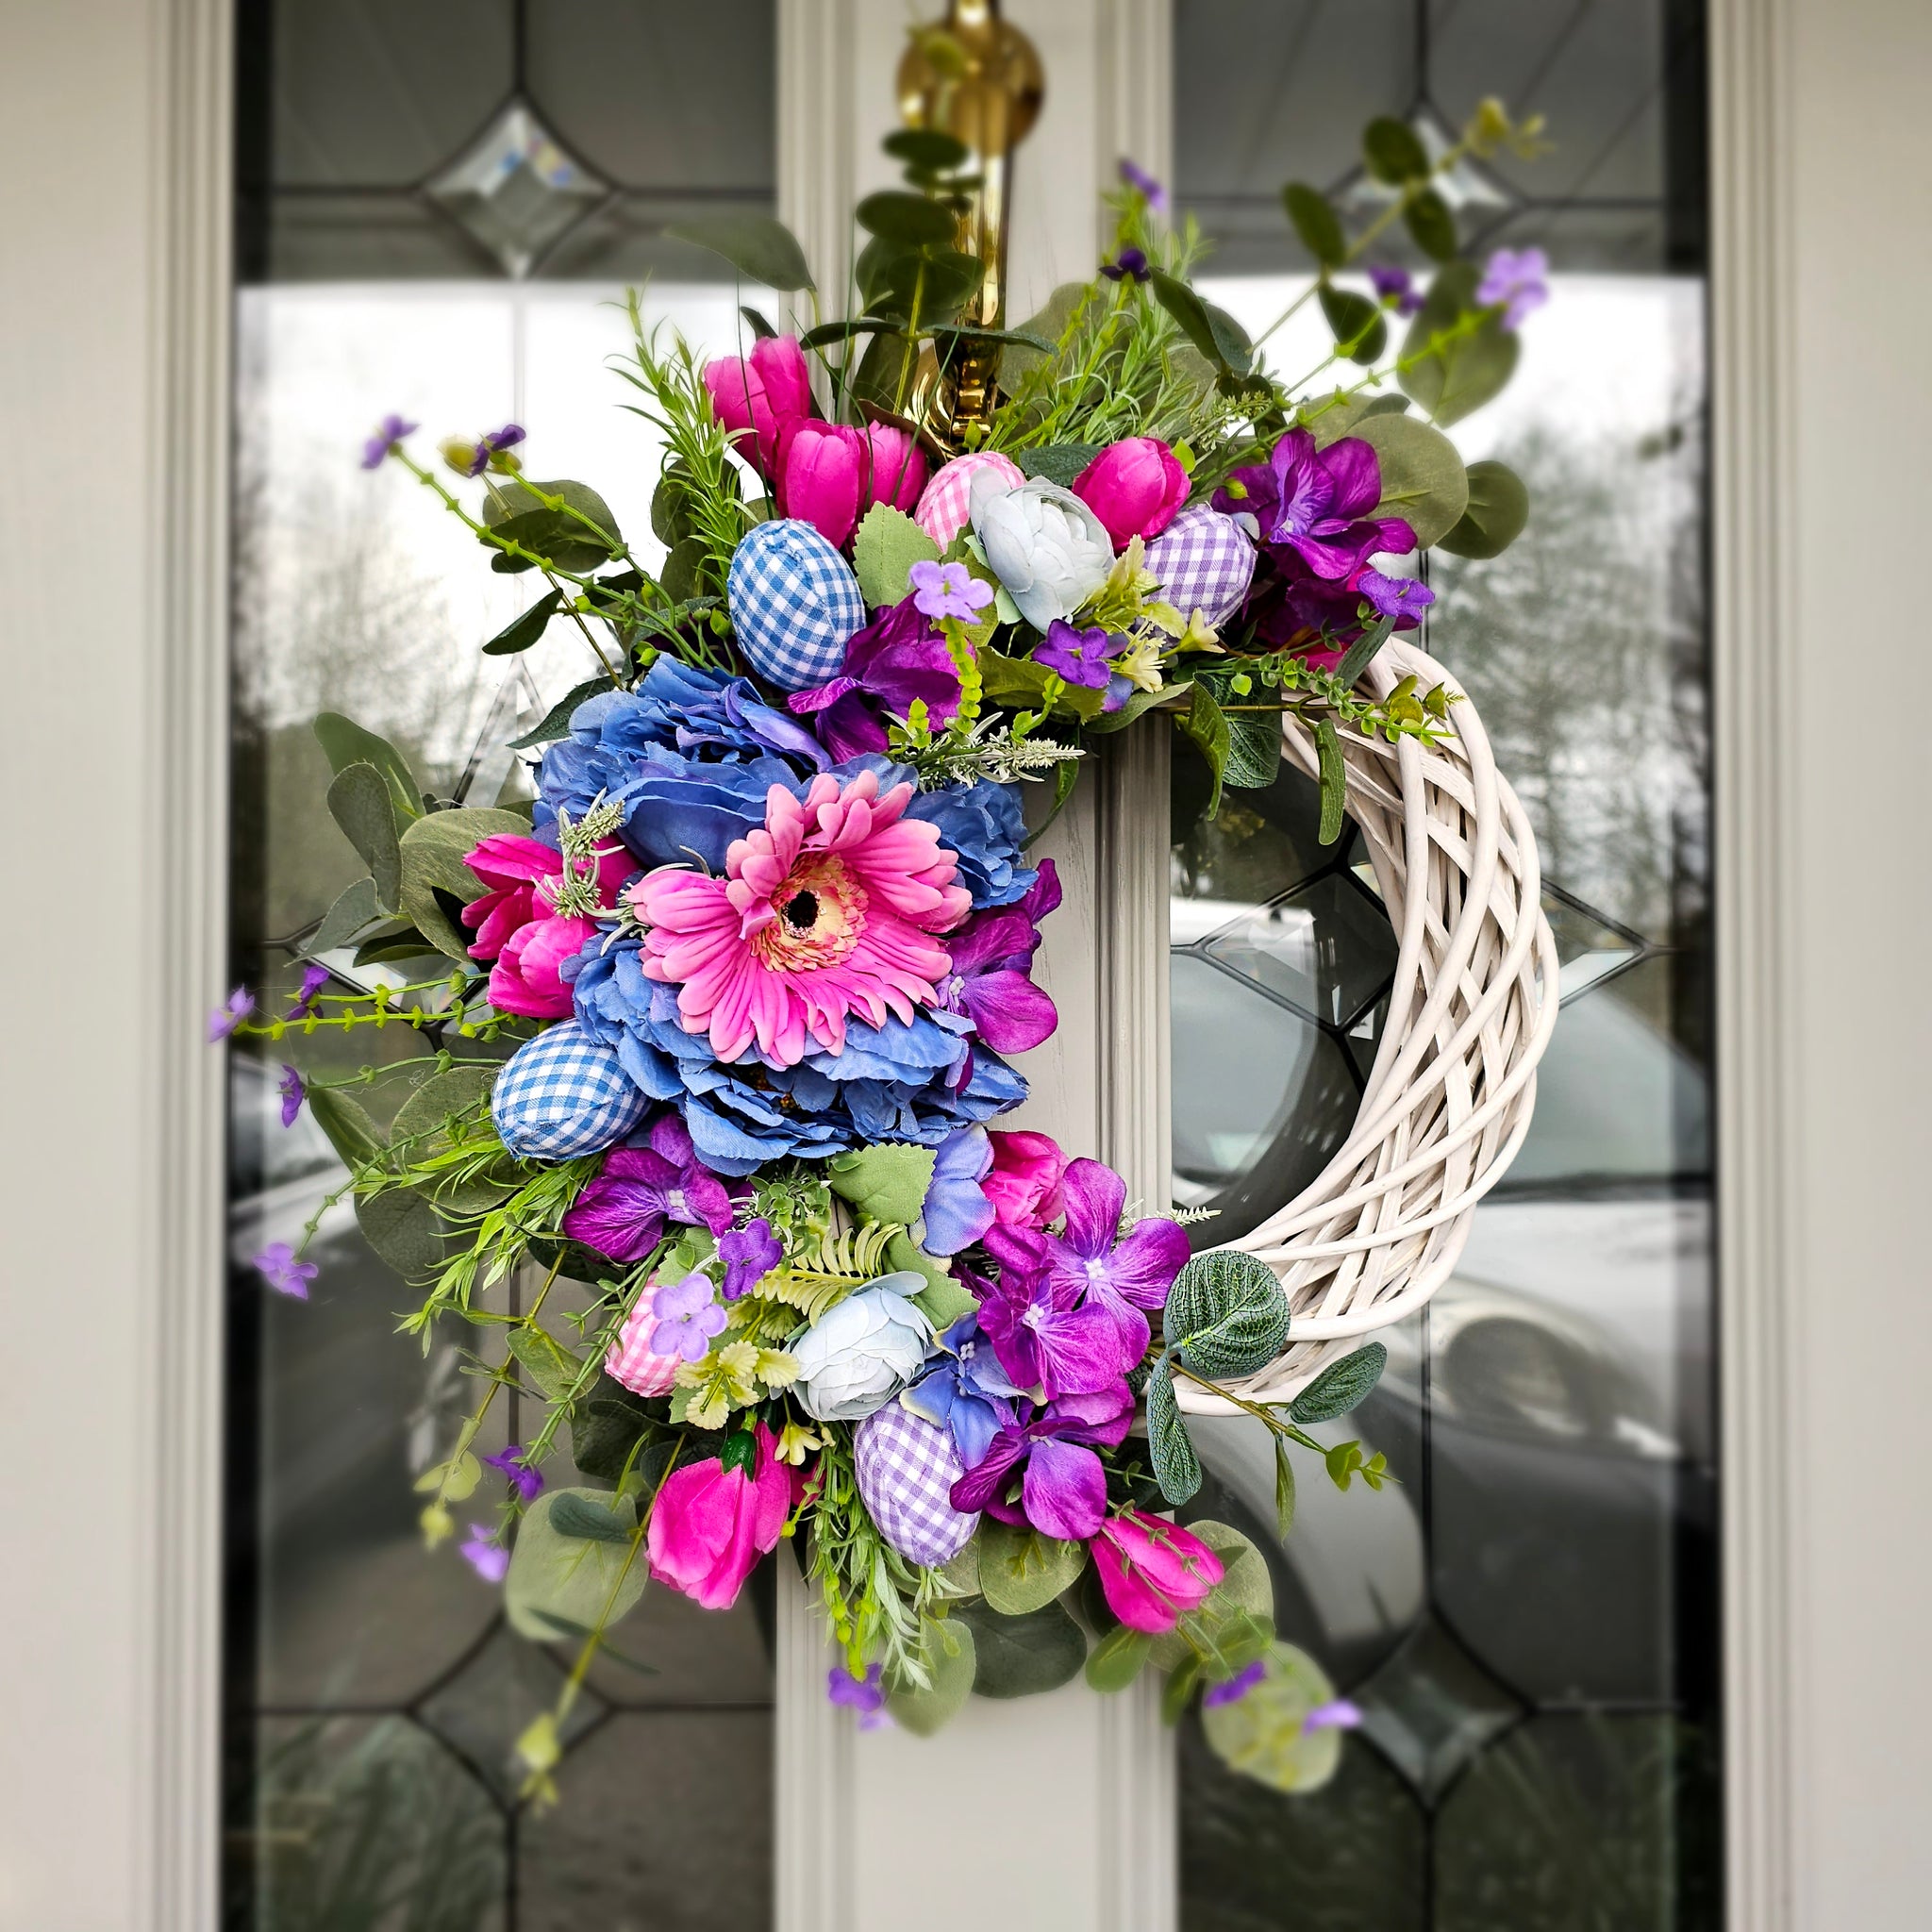 The Easter Gingham wreath